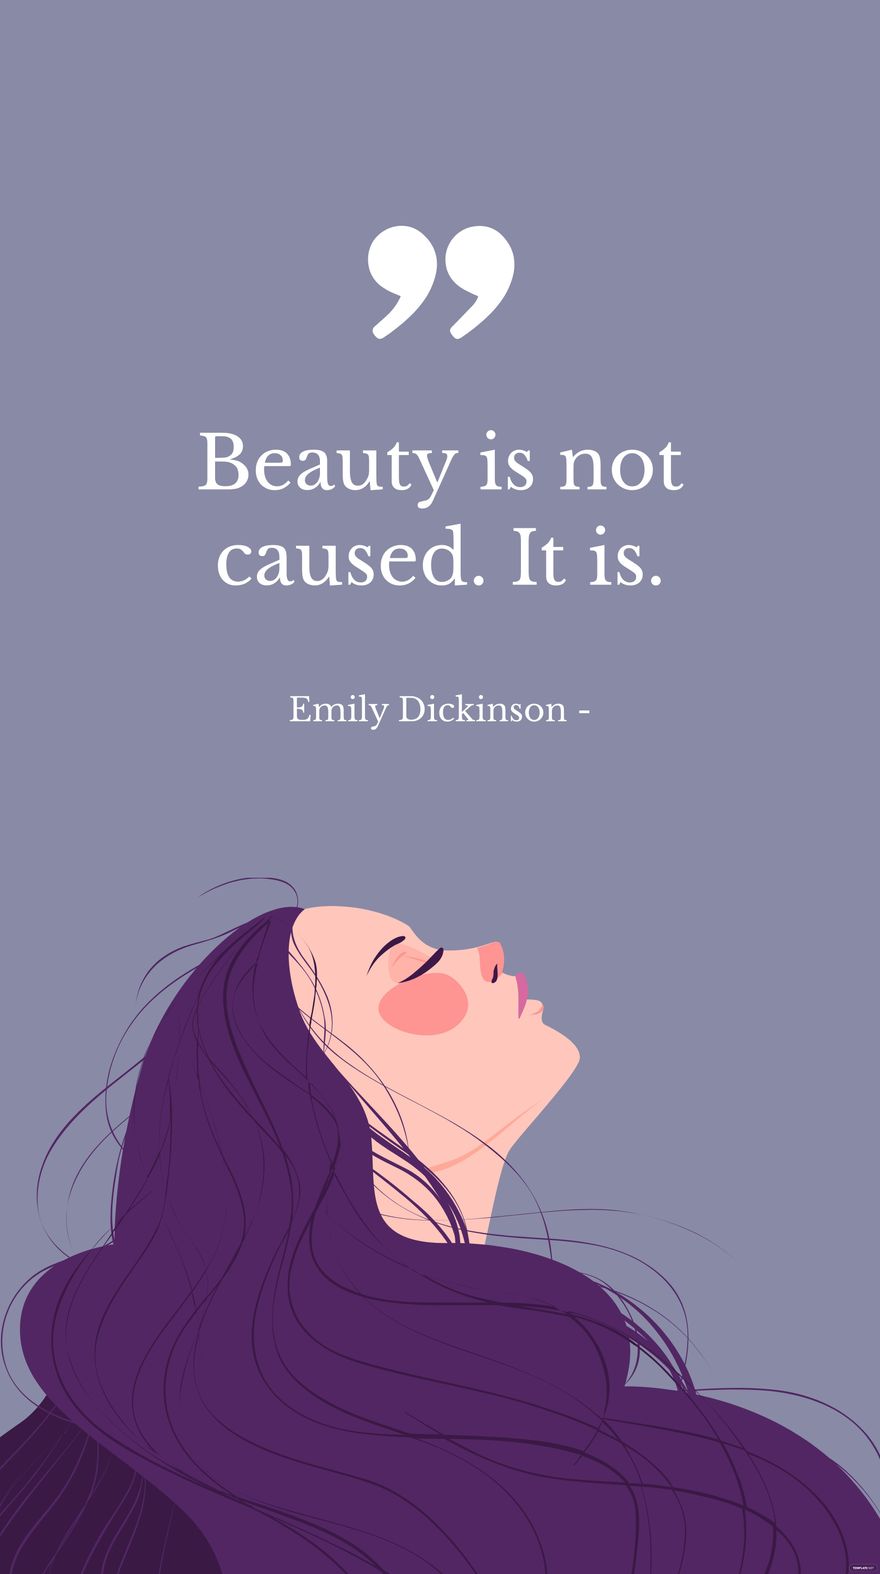 Emily Dickinson - Beauty is not caused. It is. in JPG